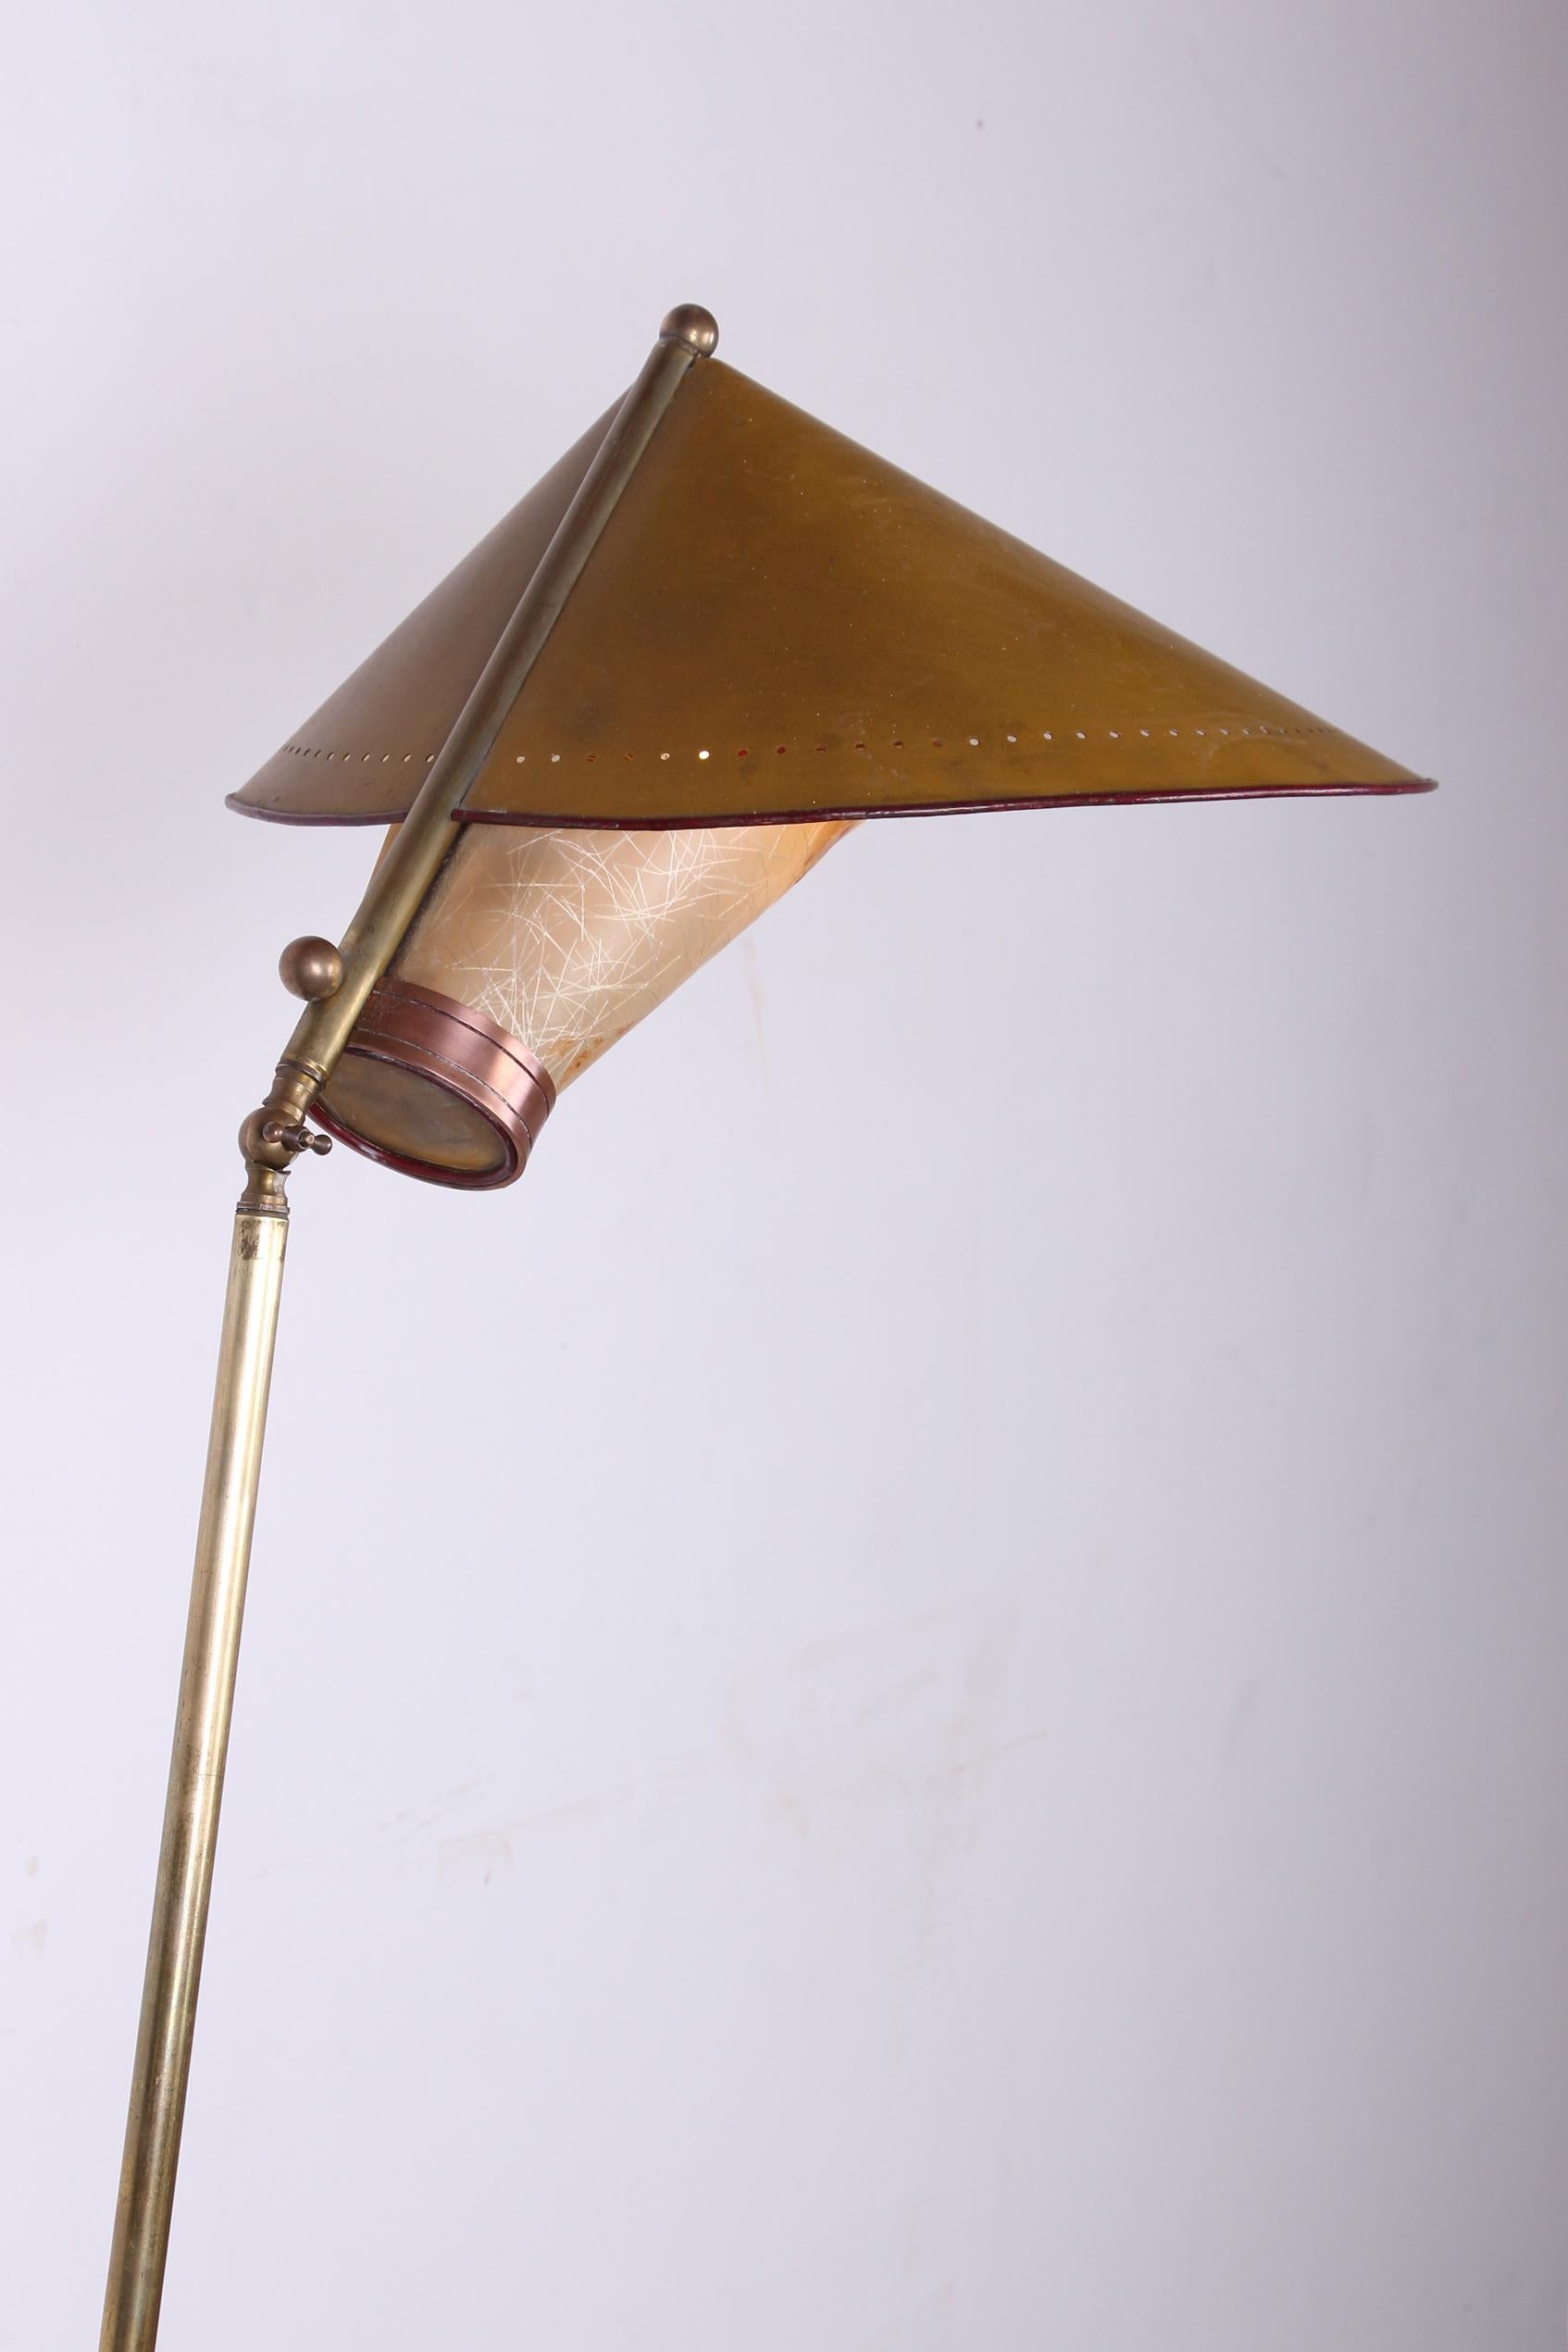 Italian Brass Floor Lamp Was Conical Adjustable in Inclination and Height Stilno 8